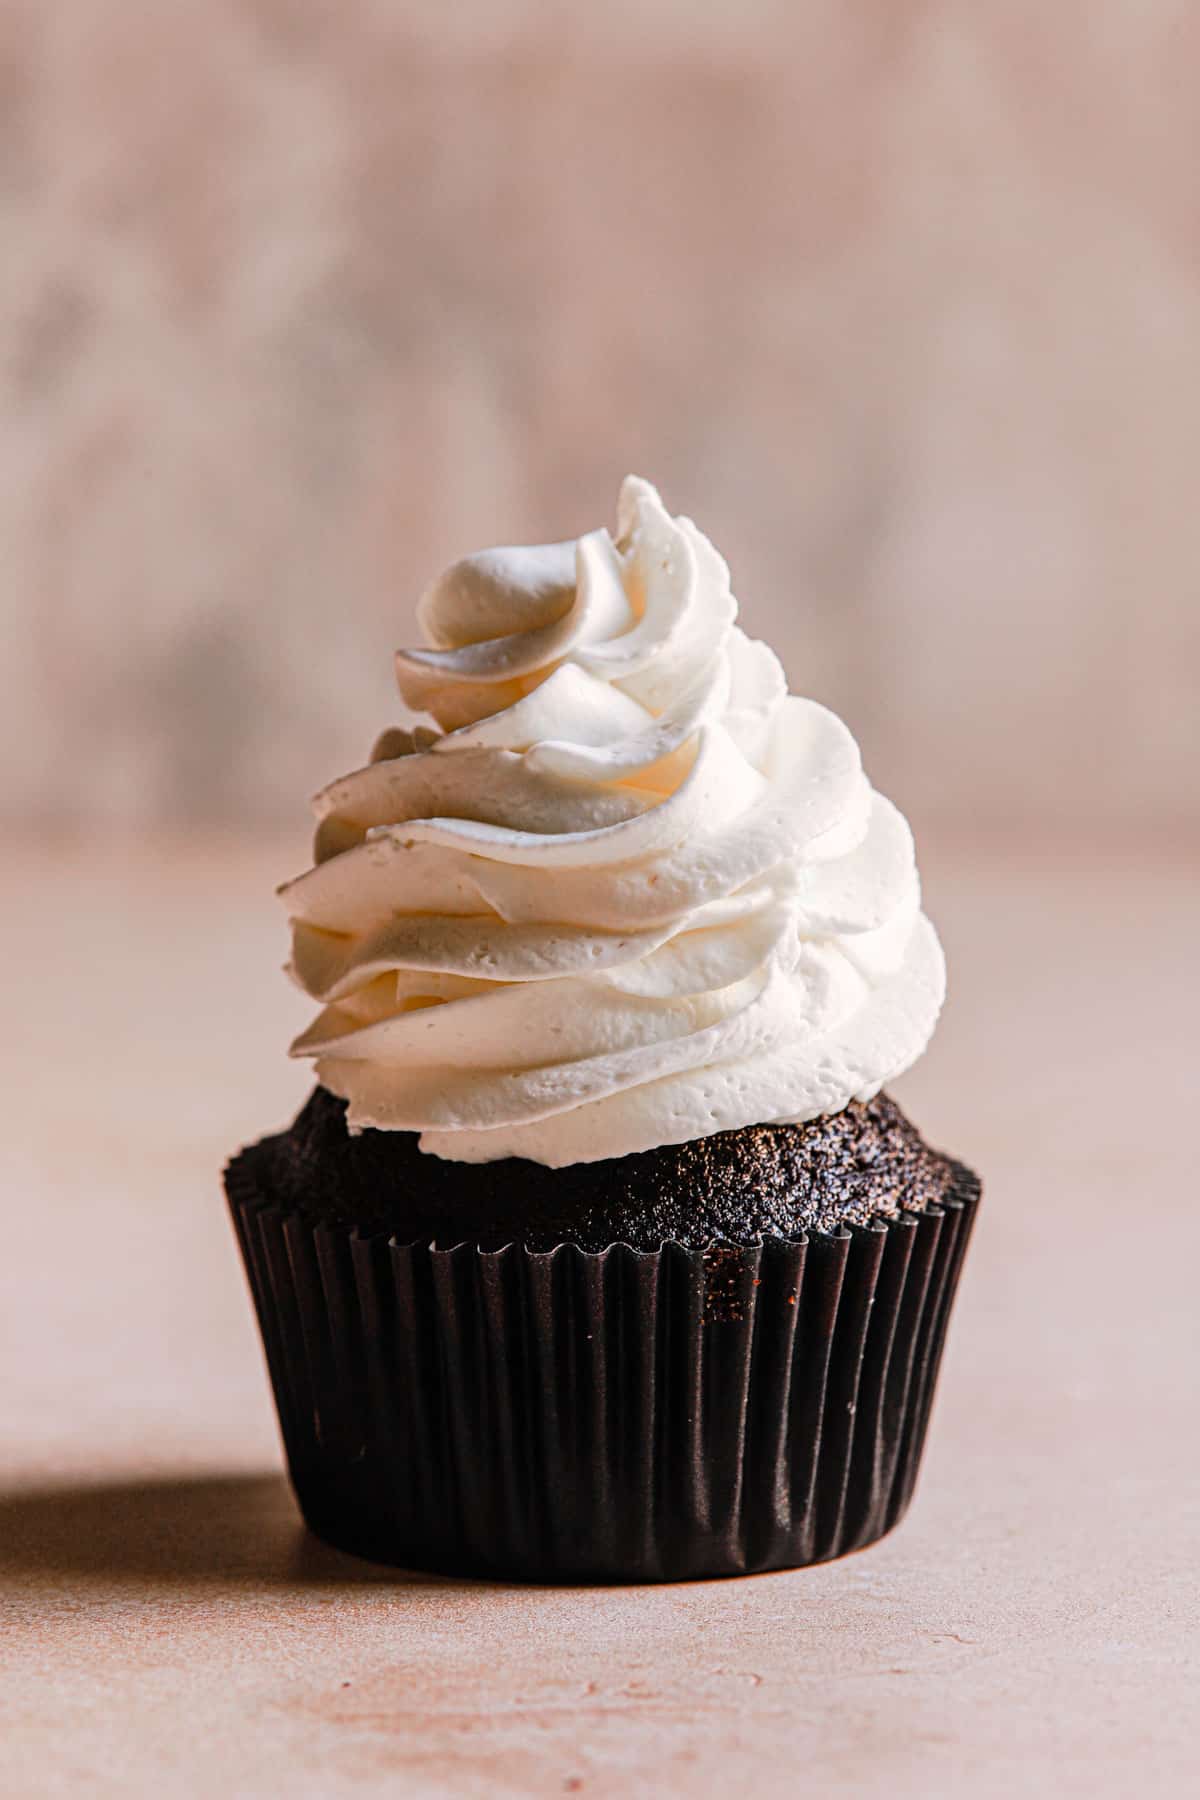 A cupcake topped with stabilized heavy cream